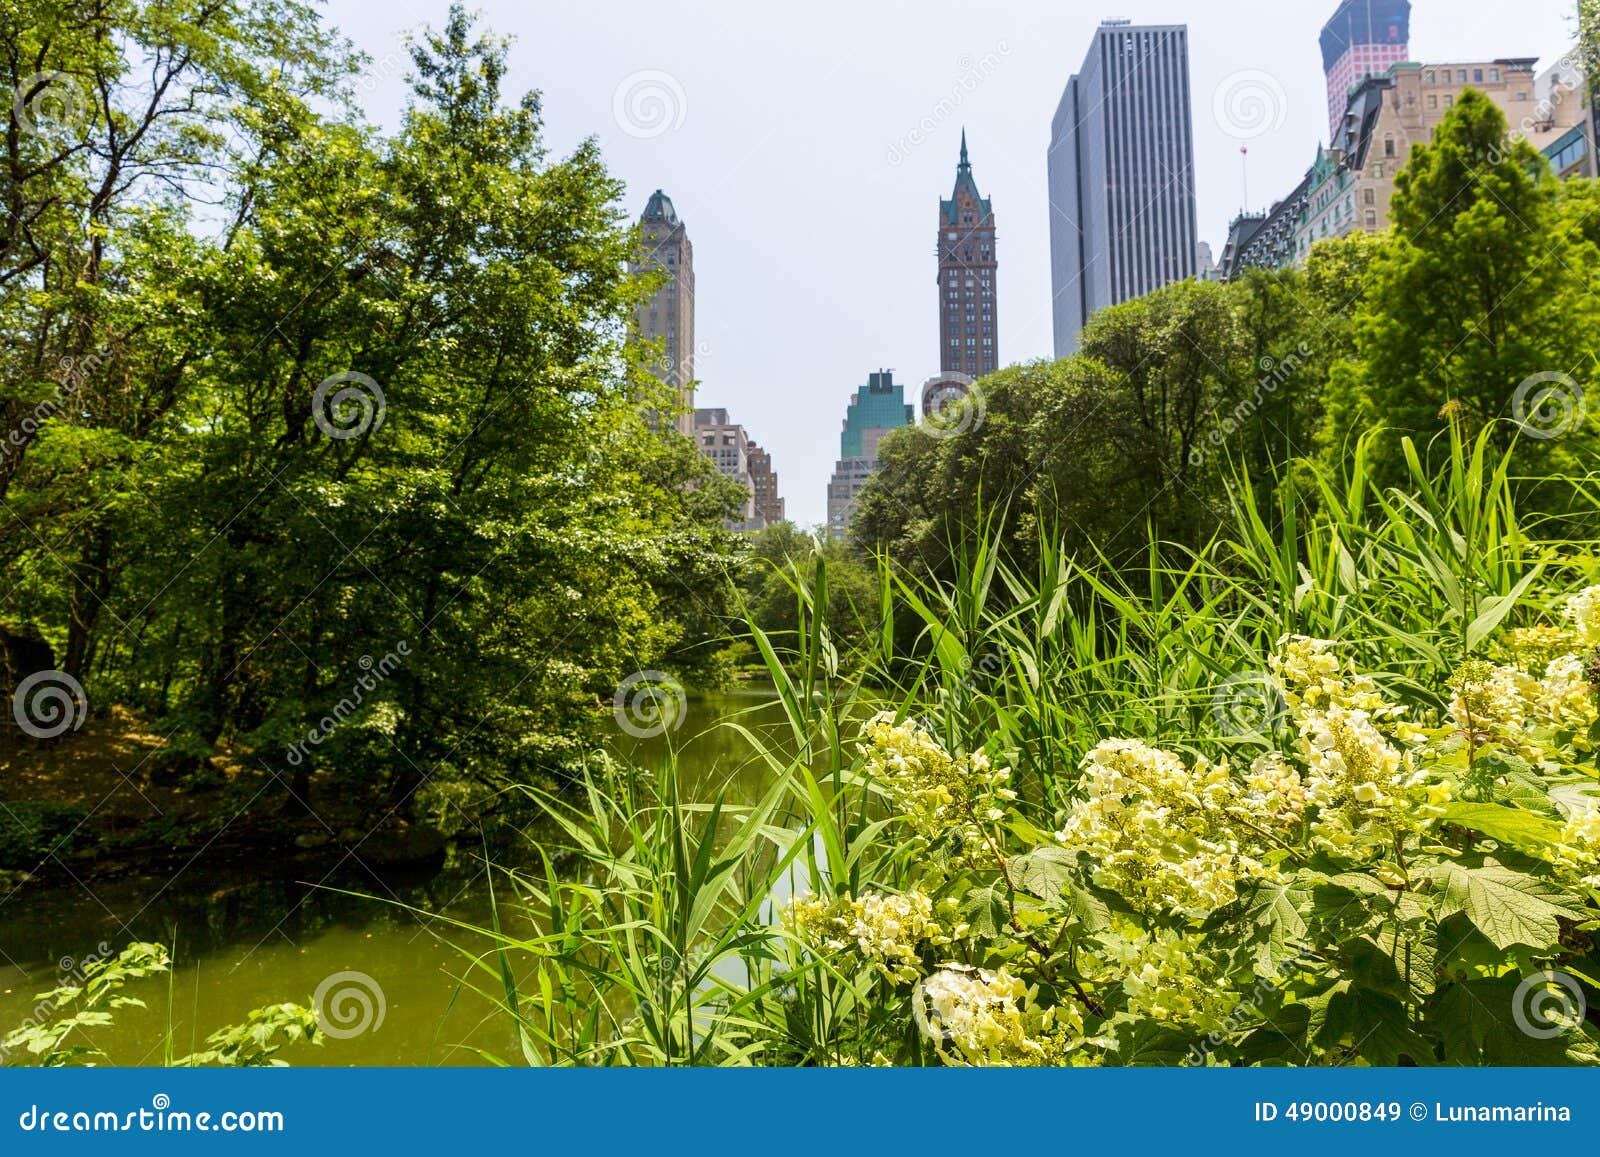 Central Park Flowers Manhattan New York Stock Image - Image of sunny ...